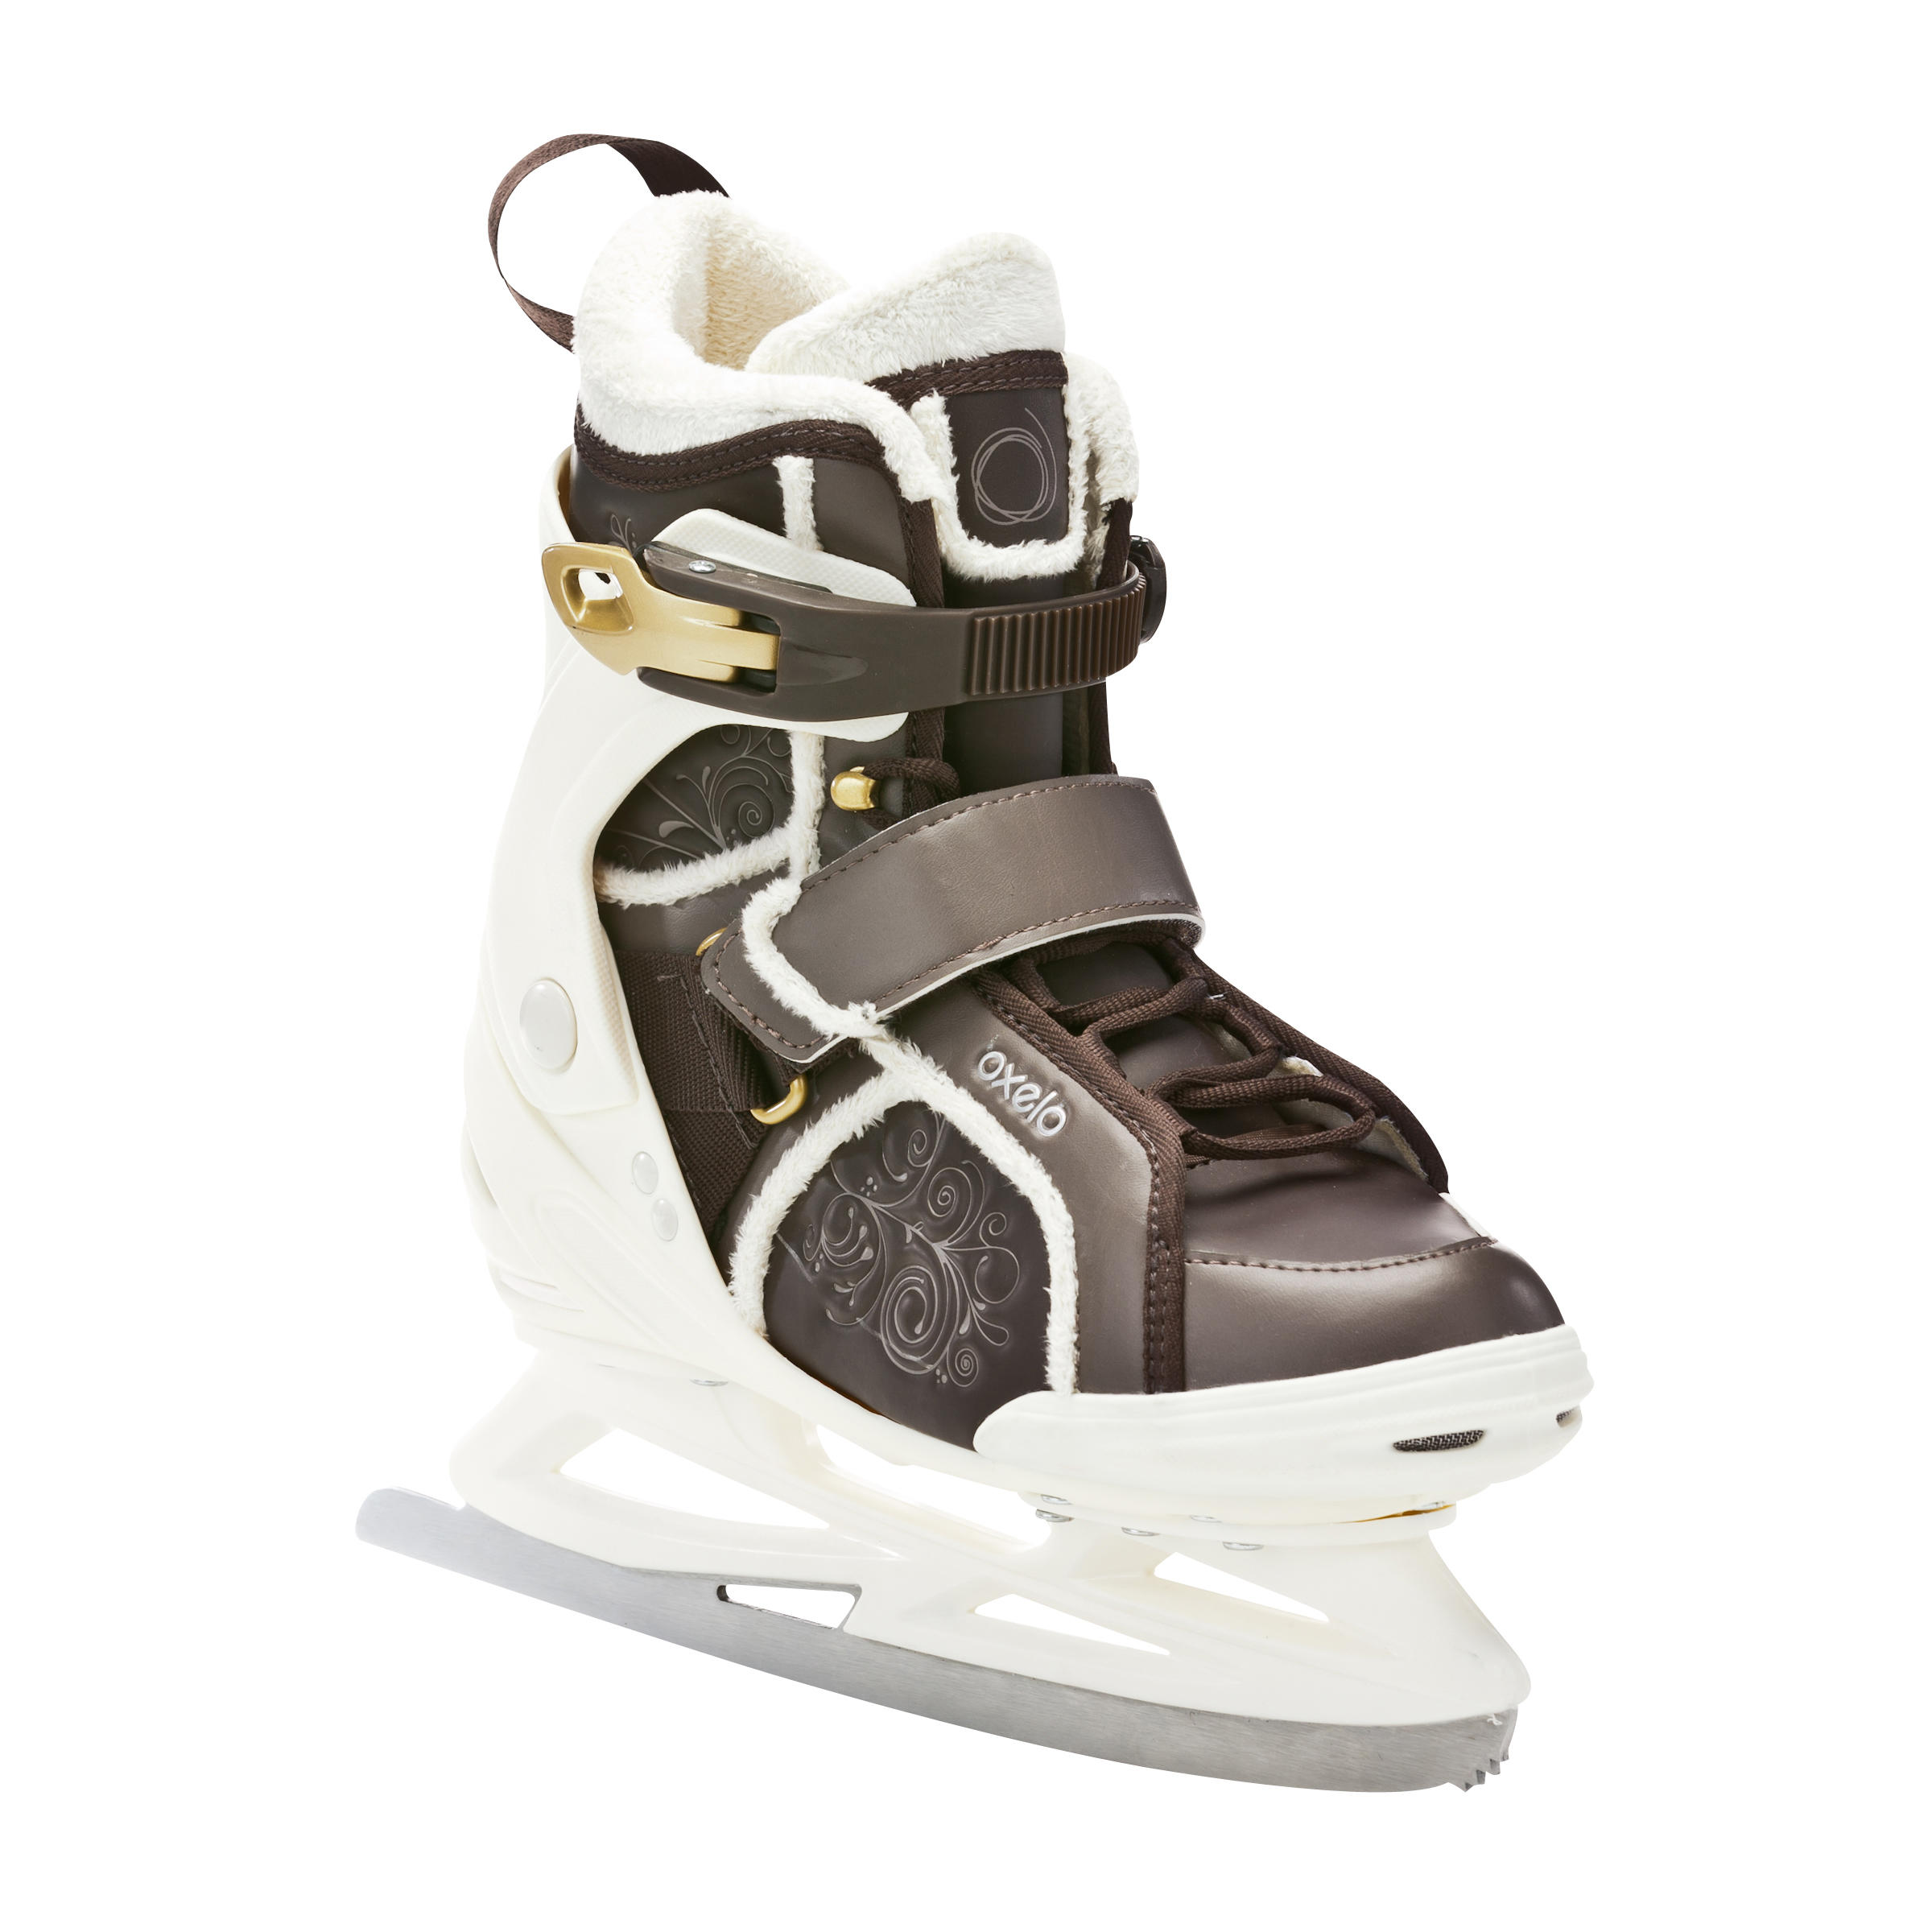 OXELO FIT5 SPIRAL women's ice skates - brown